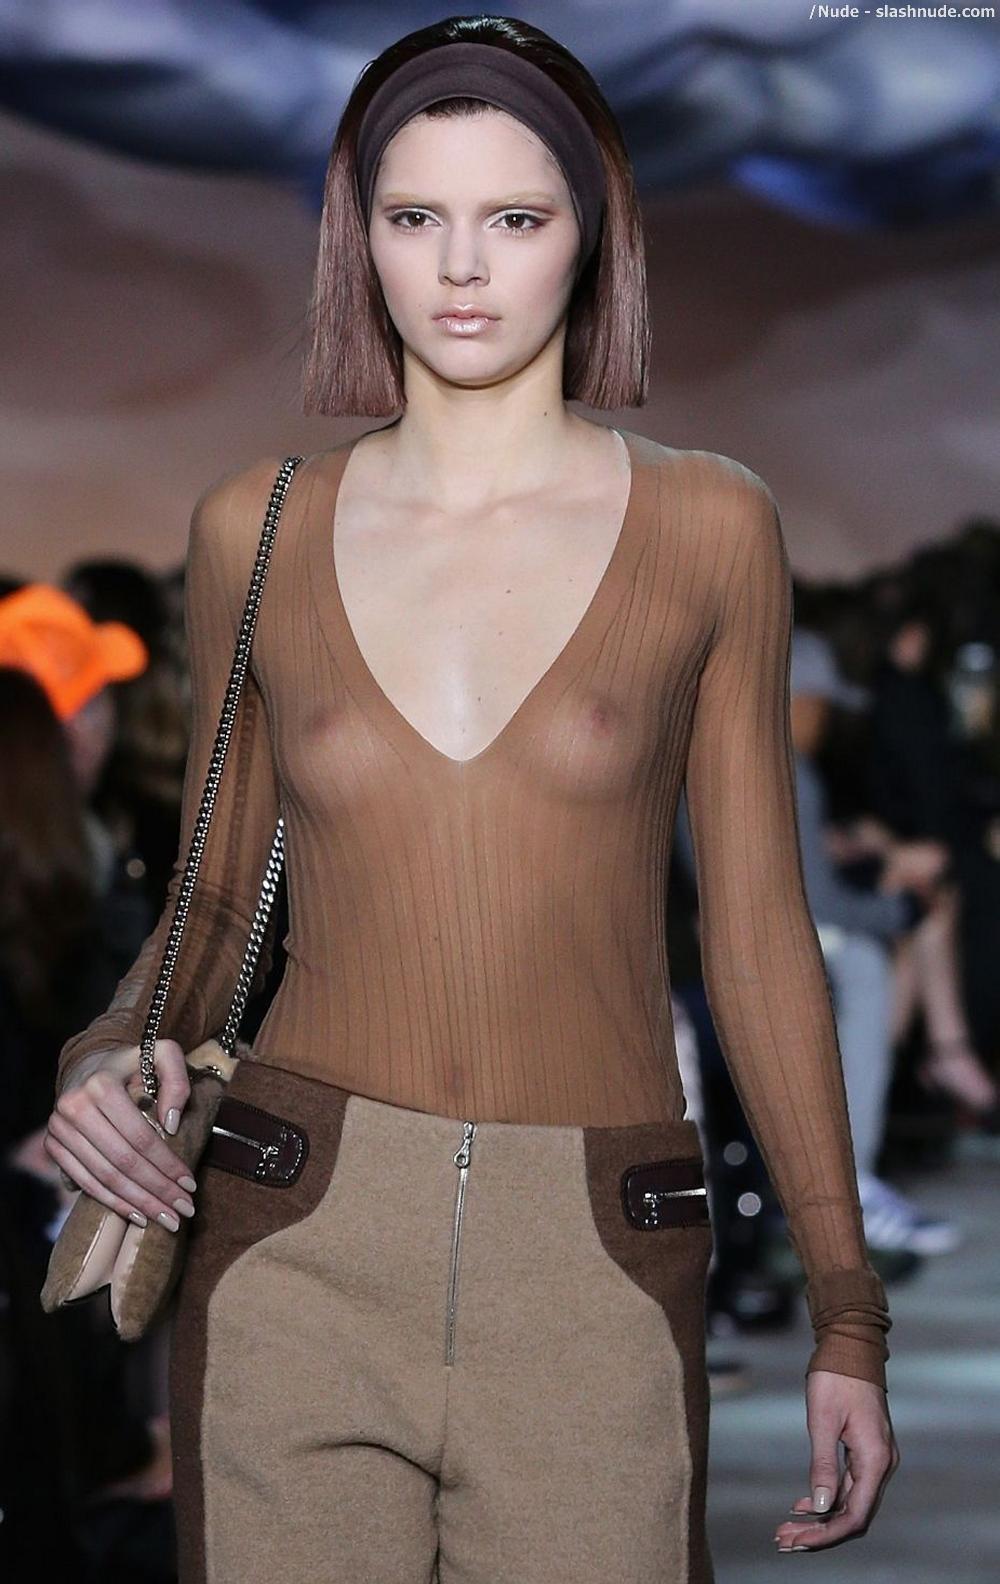 Kendall Jenner Breasts Bared On New York Runway 2